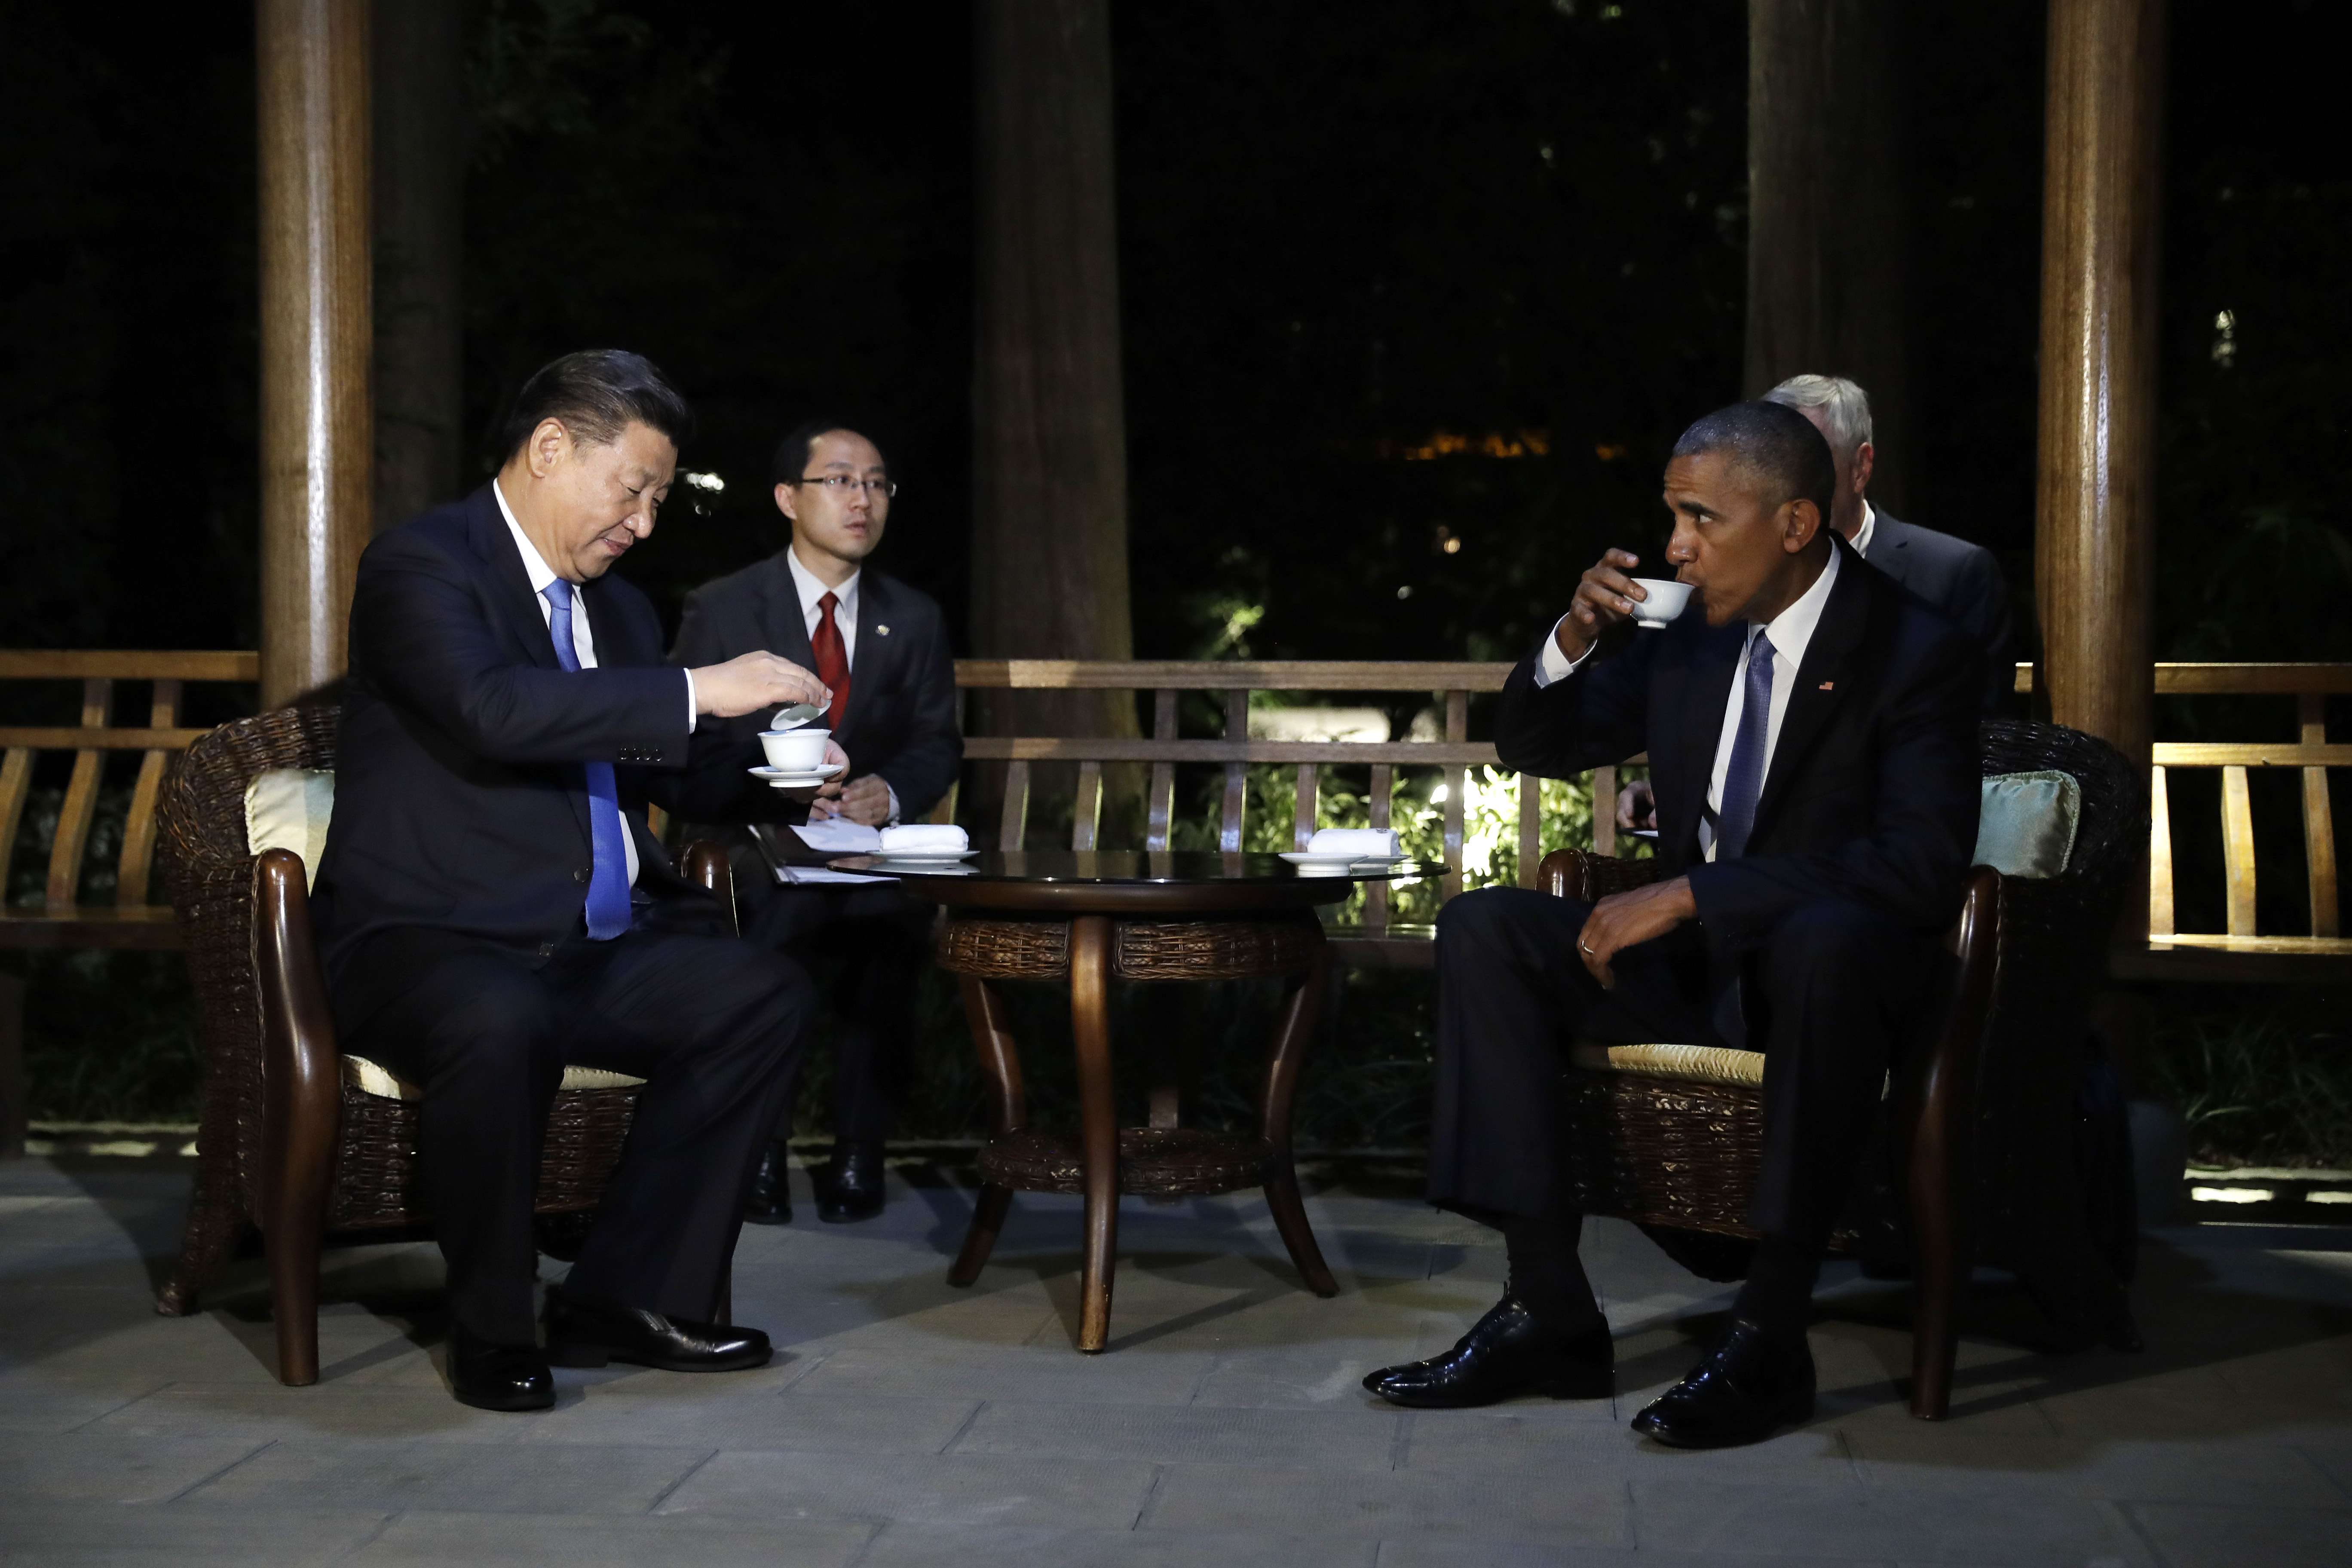 US President Barack Obama and President Xi Jinping drink tea together in a pavilion at West Lake State Guest House in Hangzhou on Saturday. Photo: AP